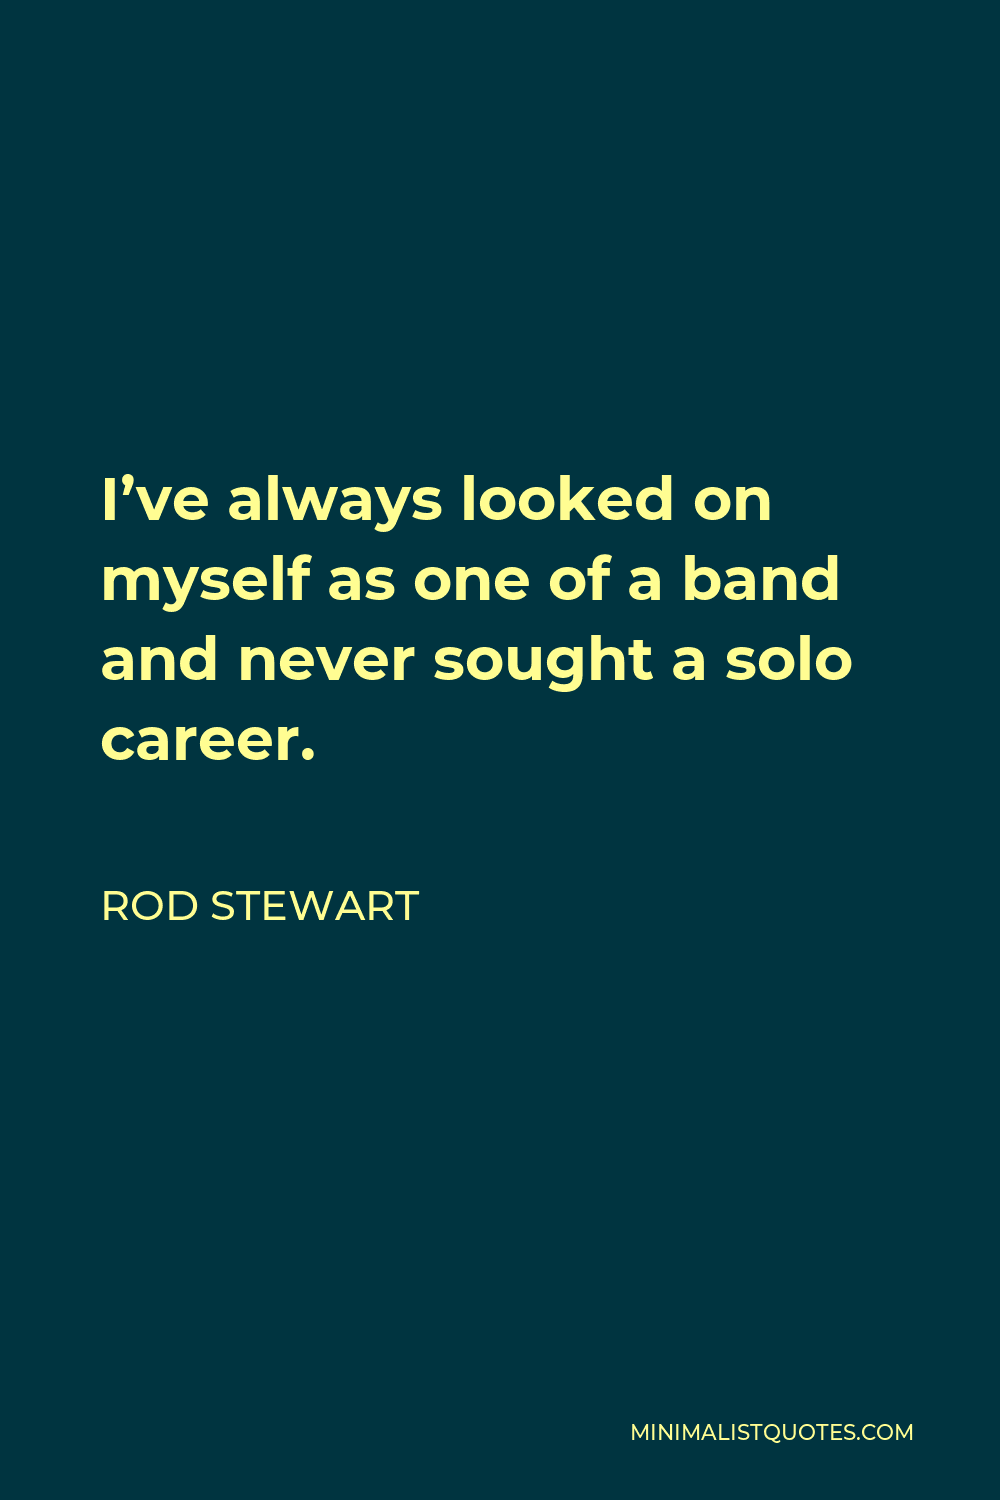 Rod Stewart Quote - I’ve always looked on myself as one of a band and never sought a solo career.